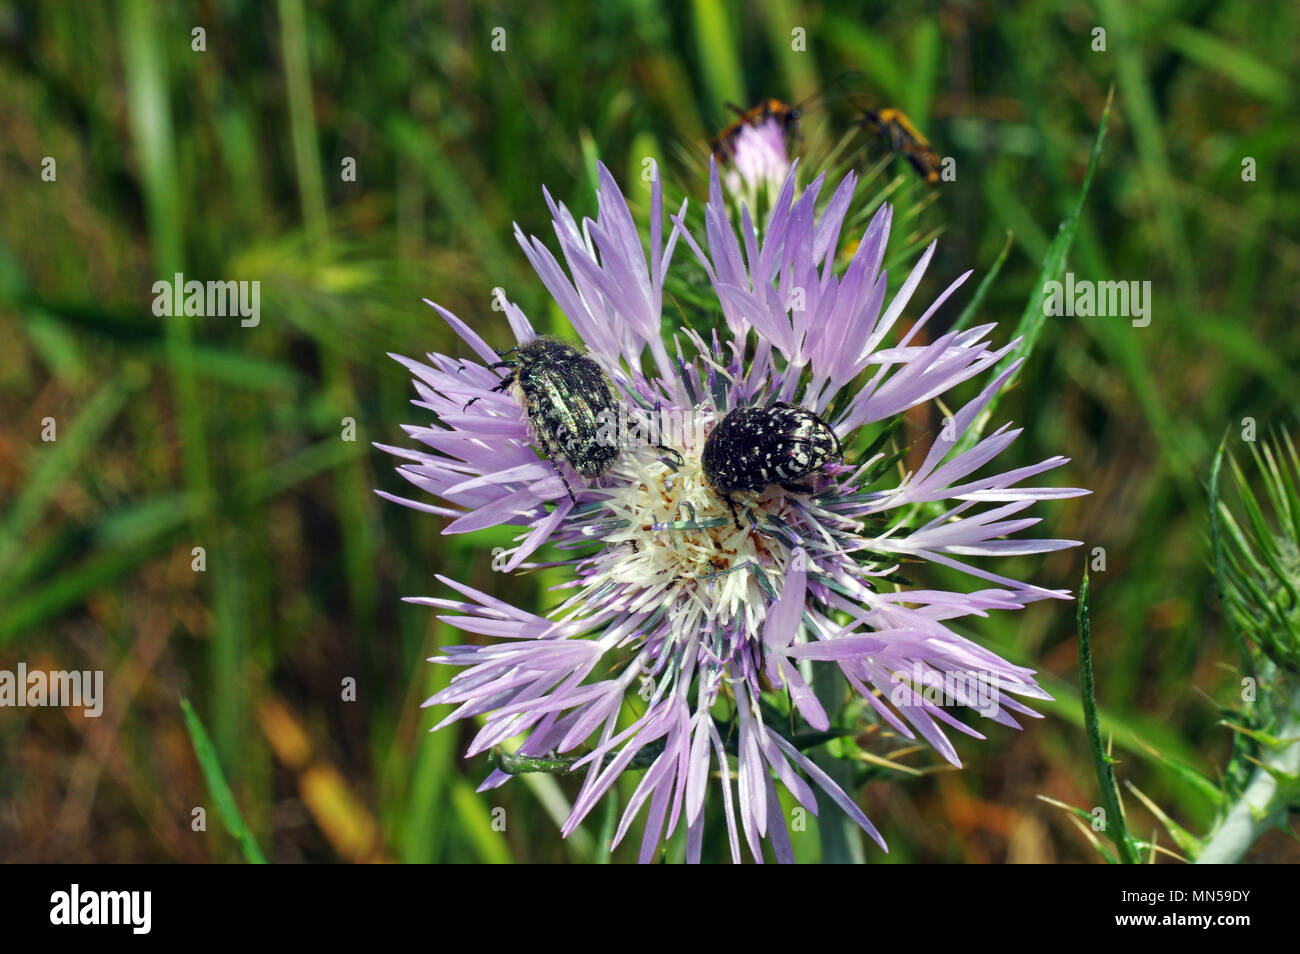 Wild thistle (galactites tomentosa) with insect close-up Stock Photo